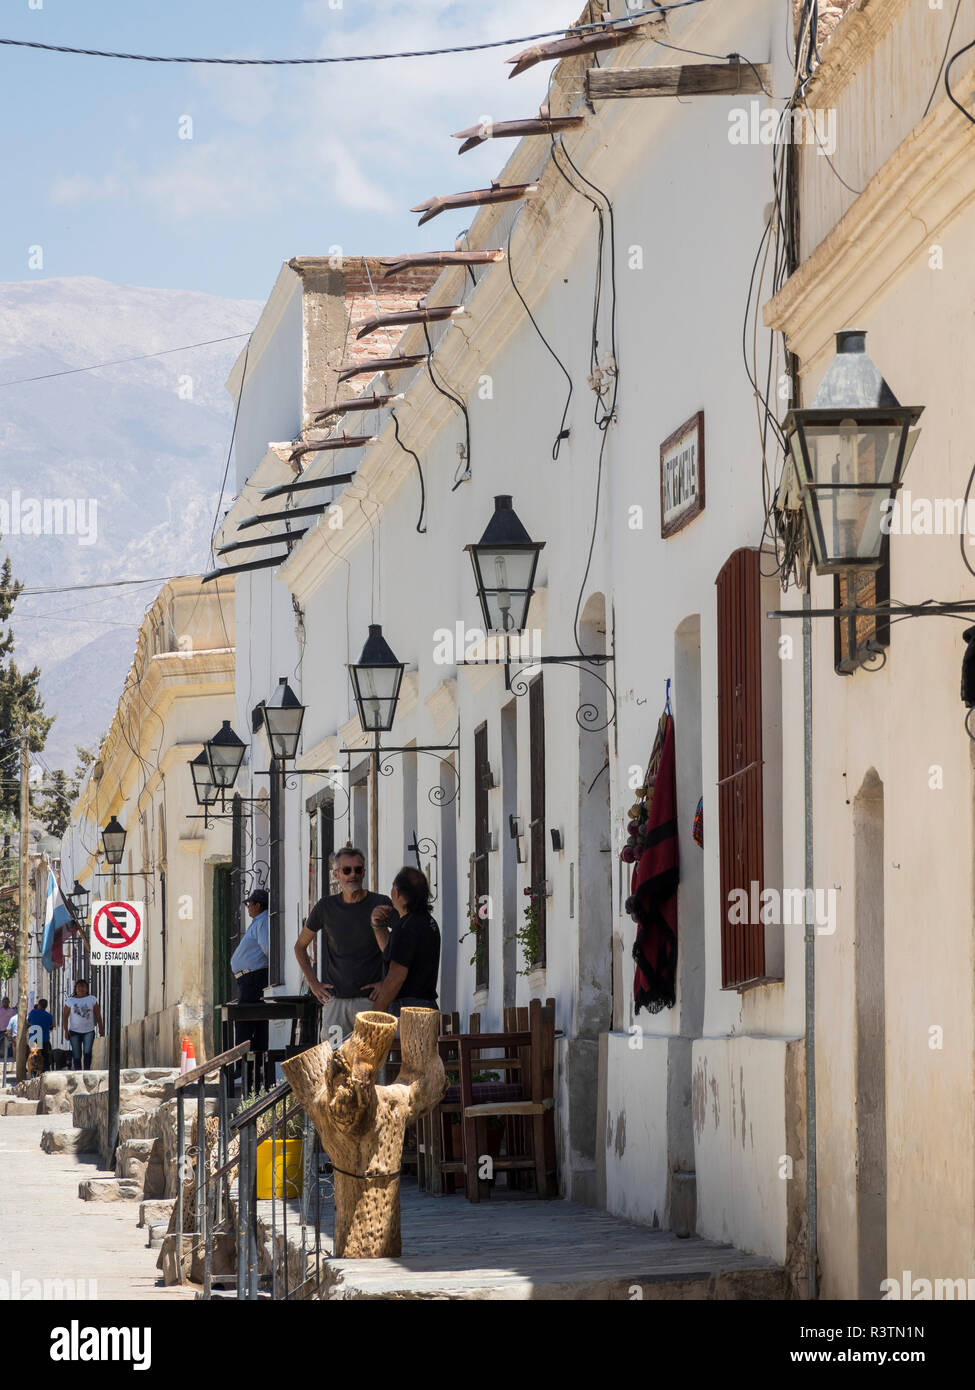 Small town of Cachi in the Valles Calchaquies region, Salta Province. South America, Argentina (Editorial Use Only) Stock Photo